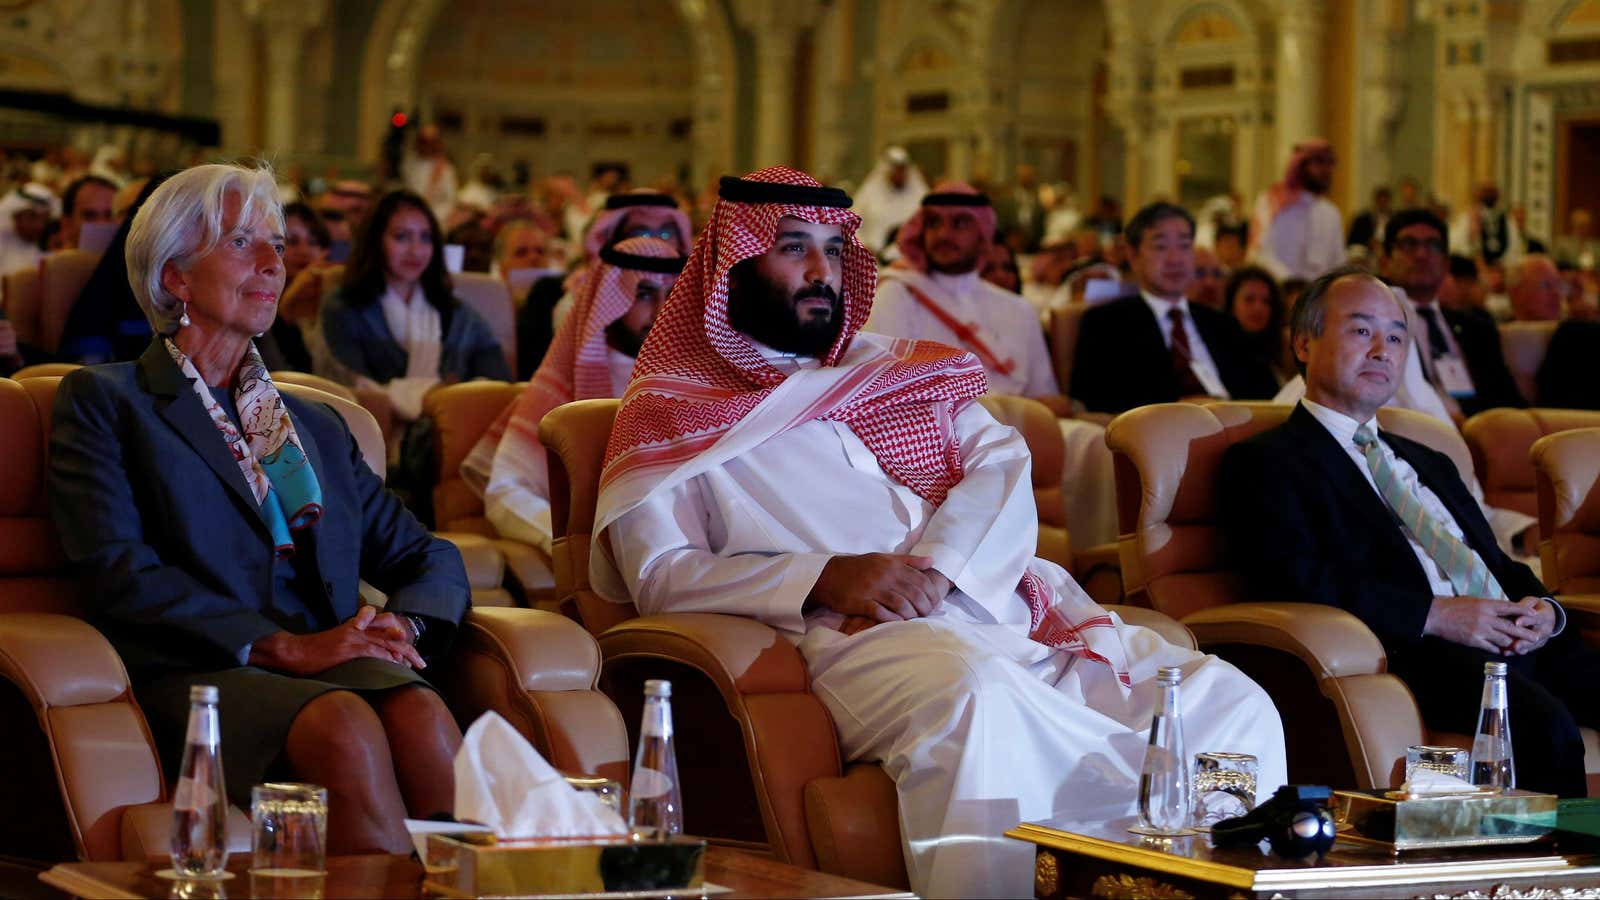 MBS and corporate leaders at “Davos in the Desert” last year.